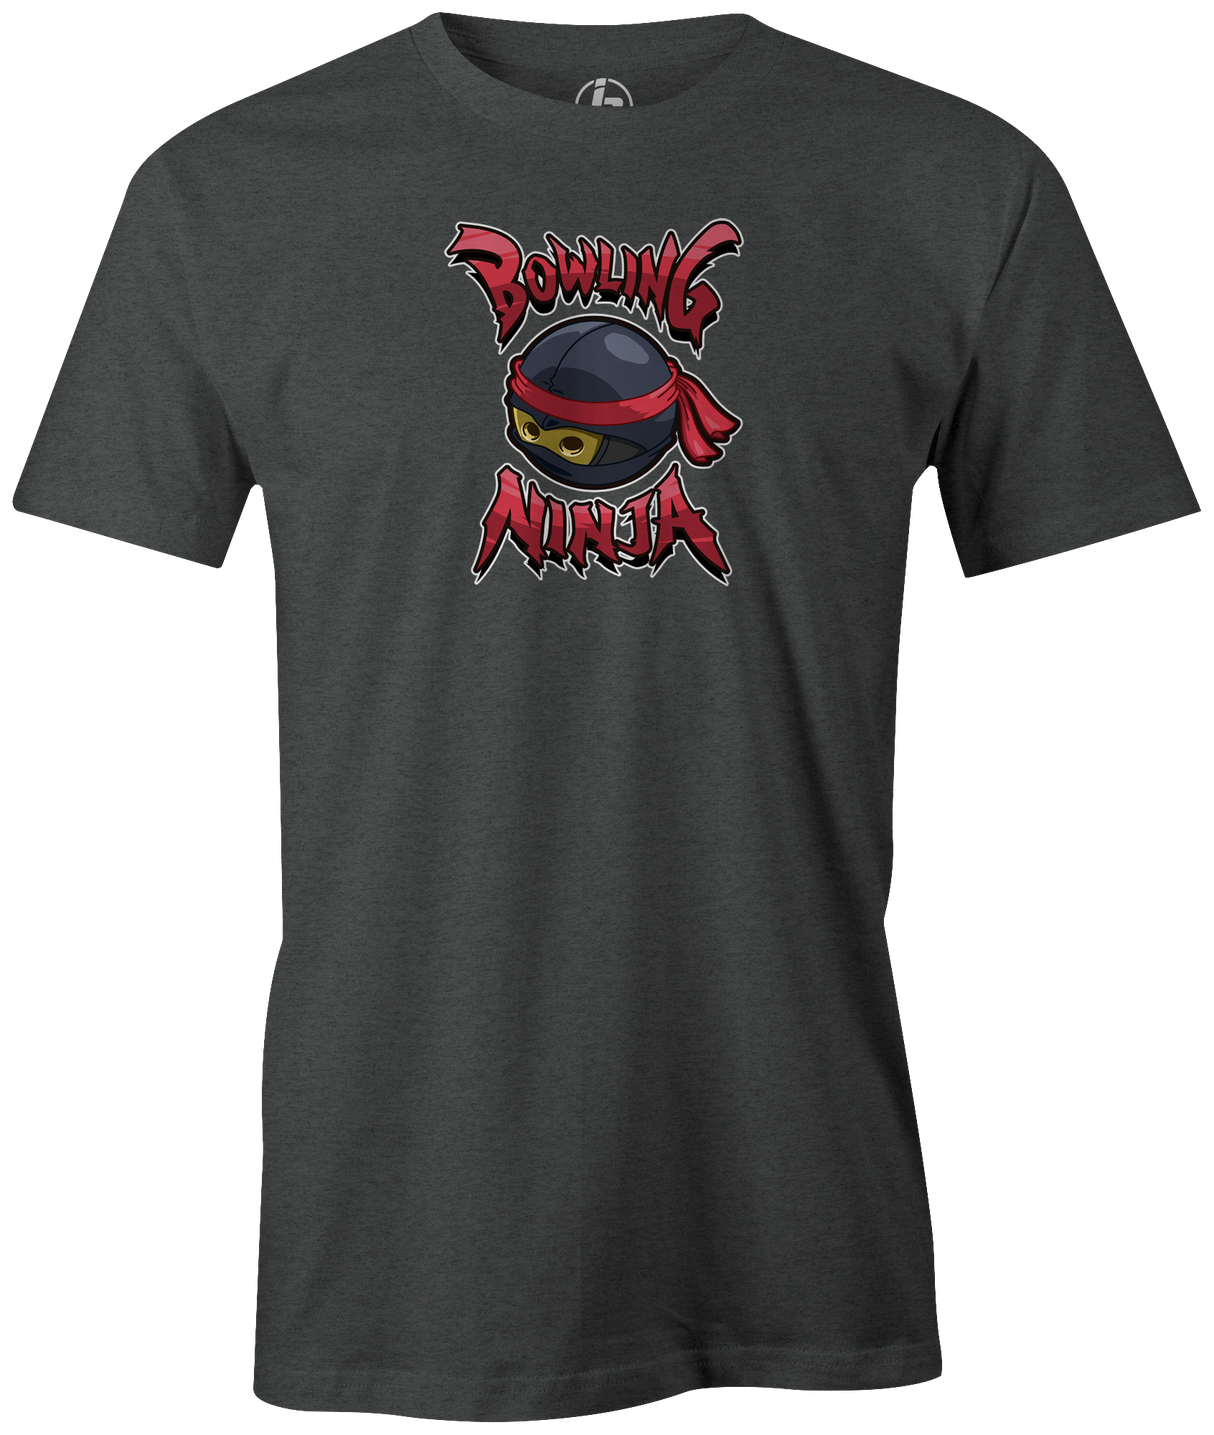 Watch out for the Bowling Ninja... known for reconnaissance, espionage and ambushing his competitors. pick up this cool The Bowling Kid tee. T-shirt, tees, tee-shirt, league bowling team shirt, discount, free shipping, coupon, cool, movies, vintage, funny.